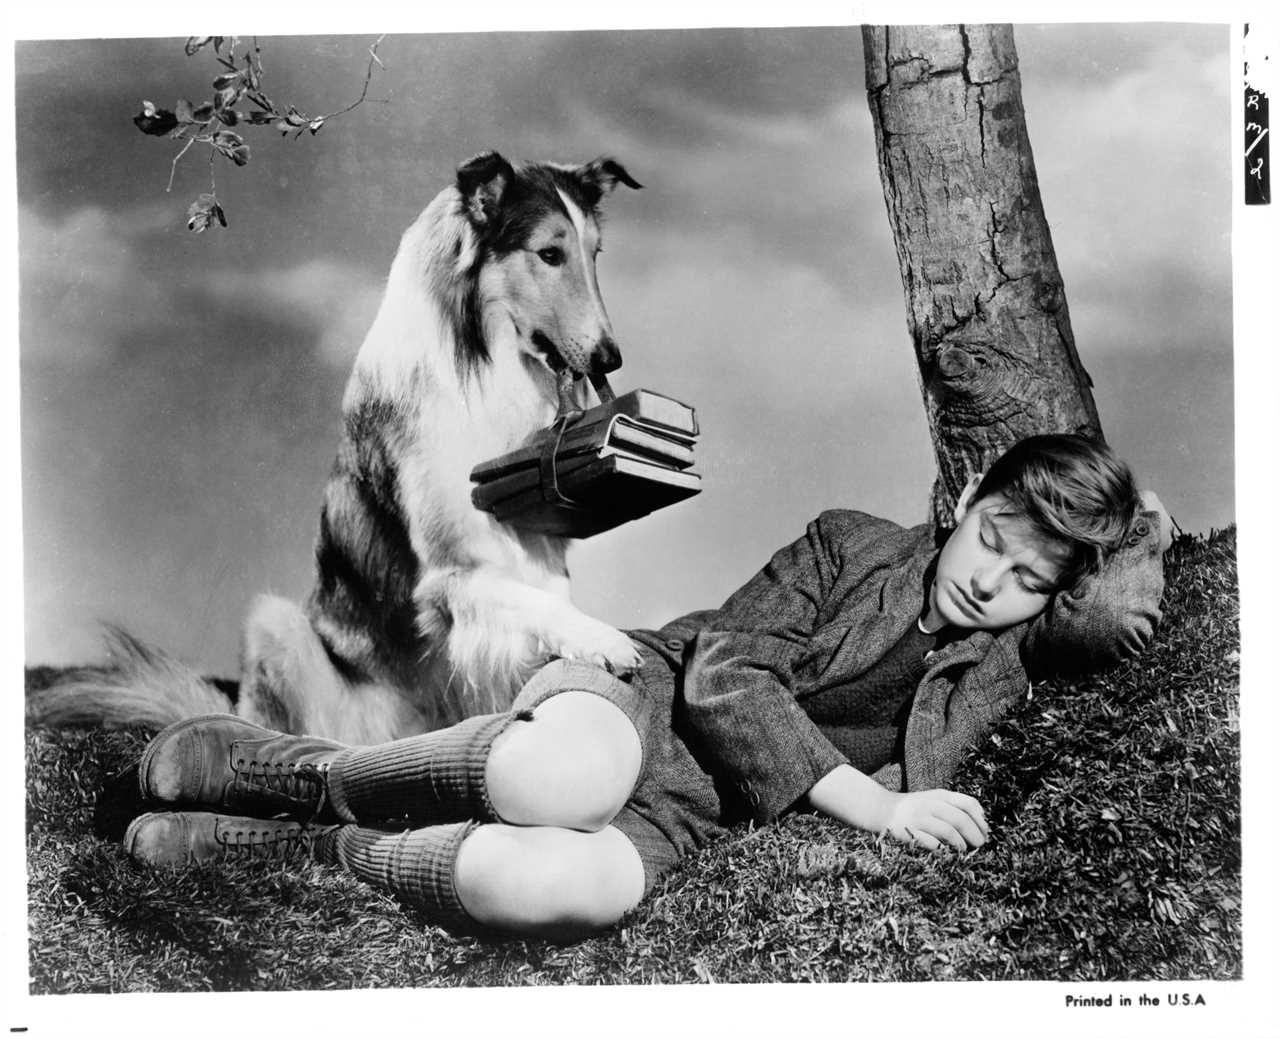 Lassie and Roddy McDowall in "Lassie Come Home."